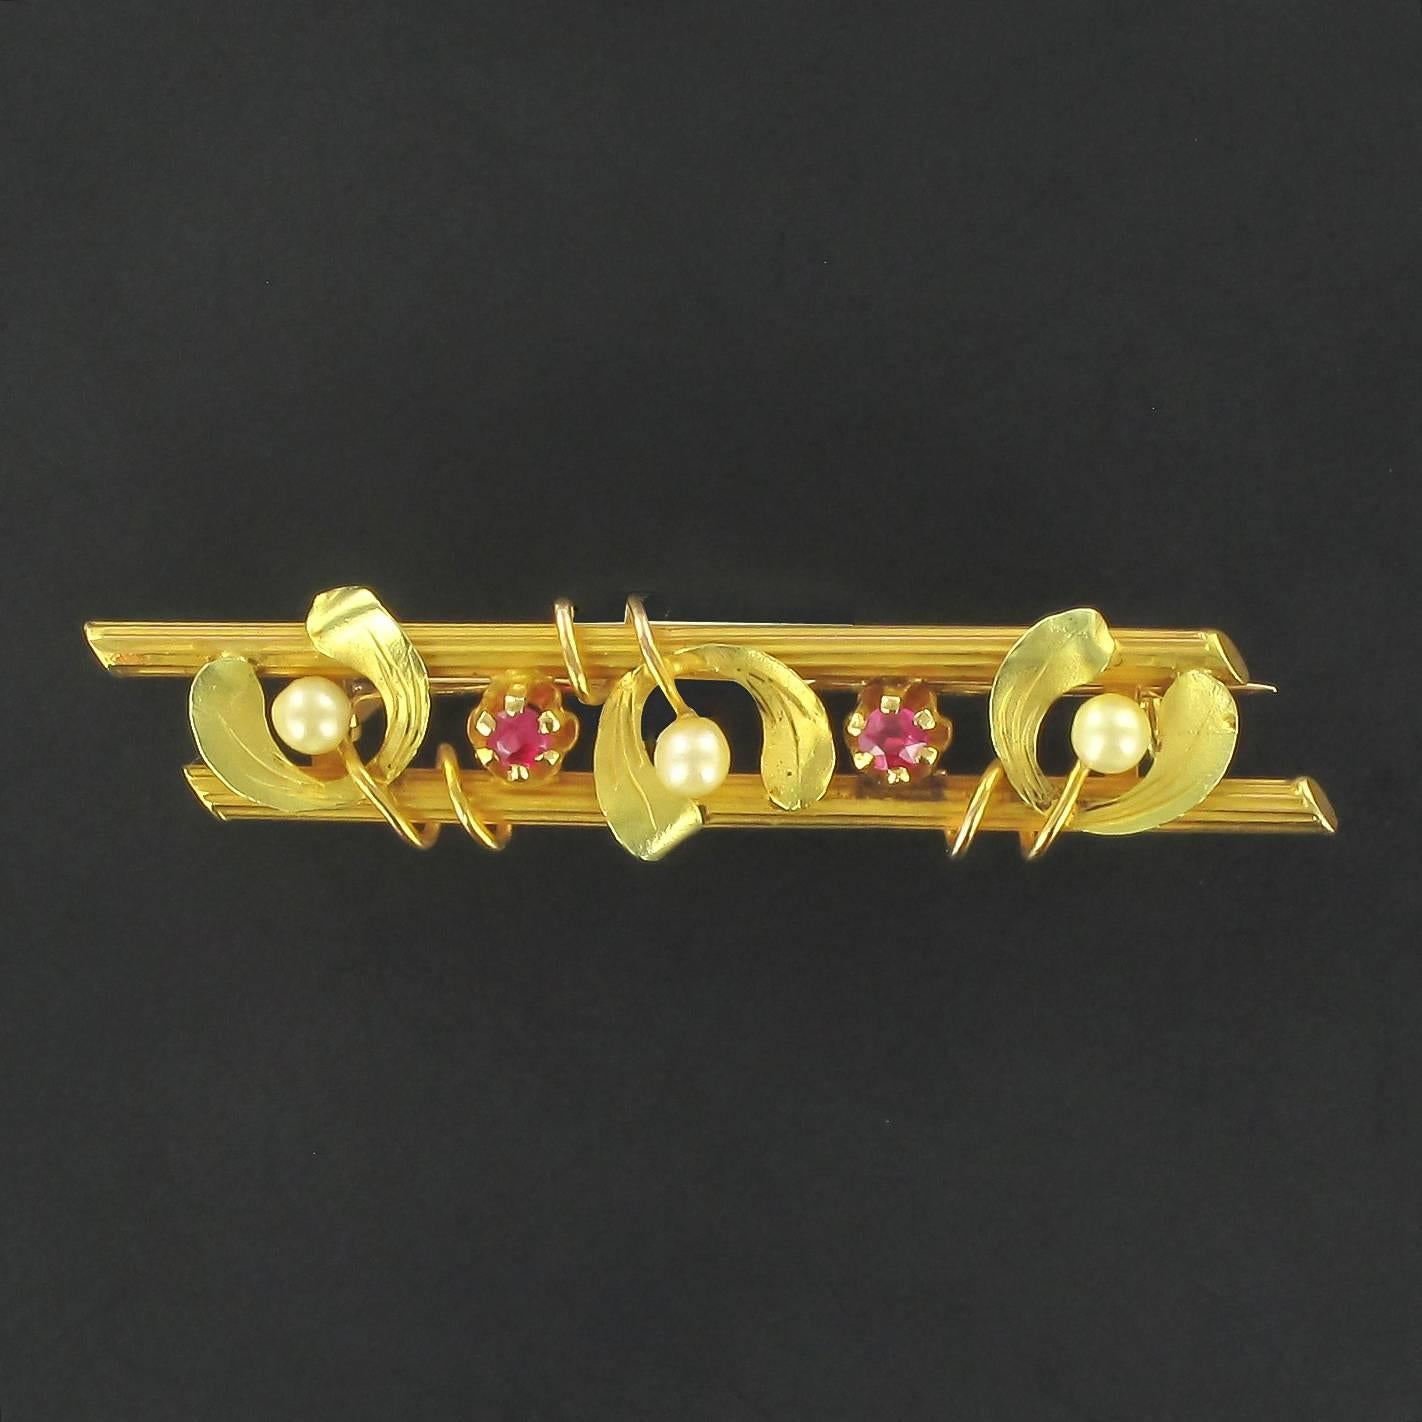 Brooch in 18 carat yellow gold, eagle head hallmark. 

Stupendous barrette brooch that is composed of 2 gold cylinders with a chiselled motif entwined by 3 matt gold leaves set with 3 small fine pearls and interspersed with 2 claw set red gems. It